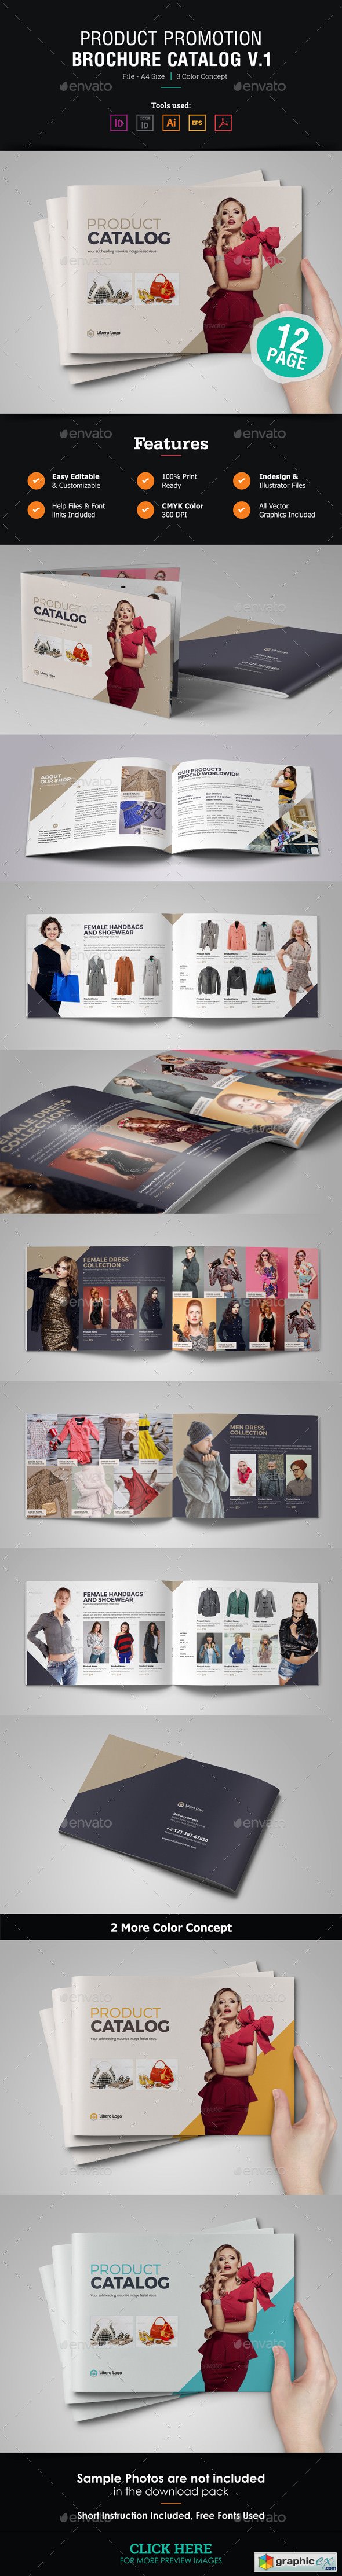 Product Promotion Brochure Catalog